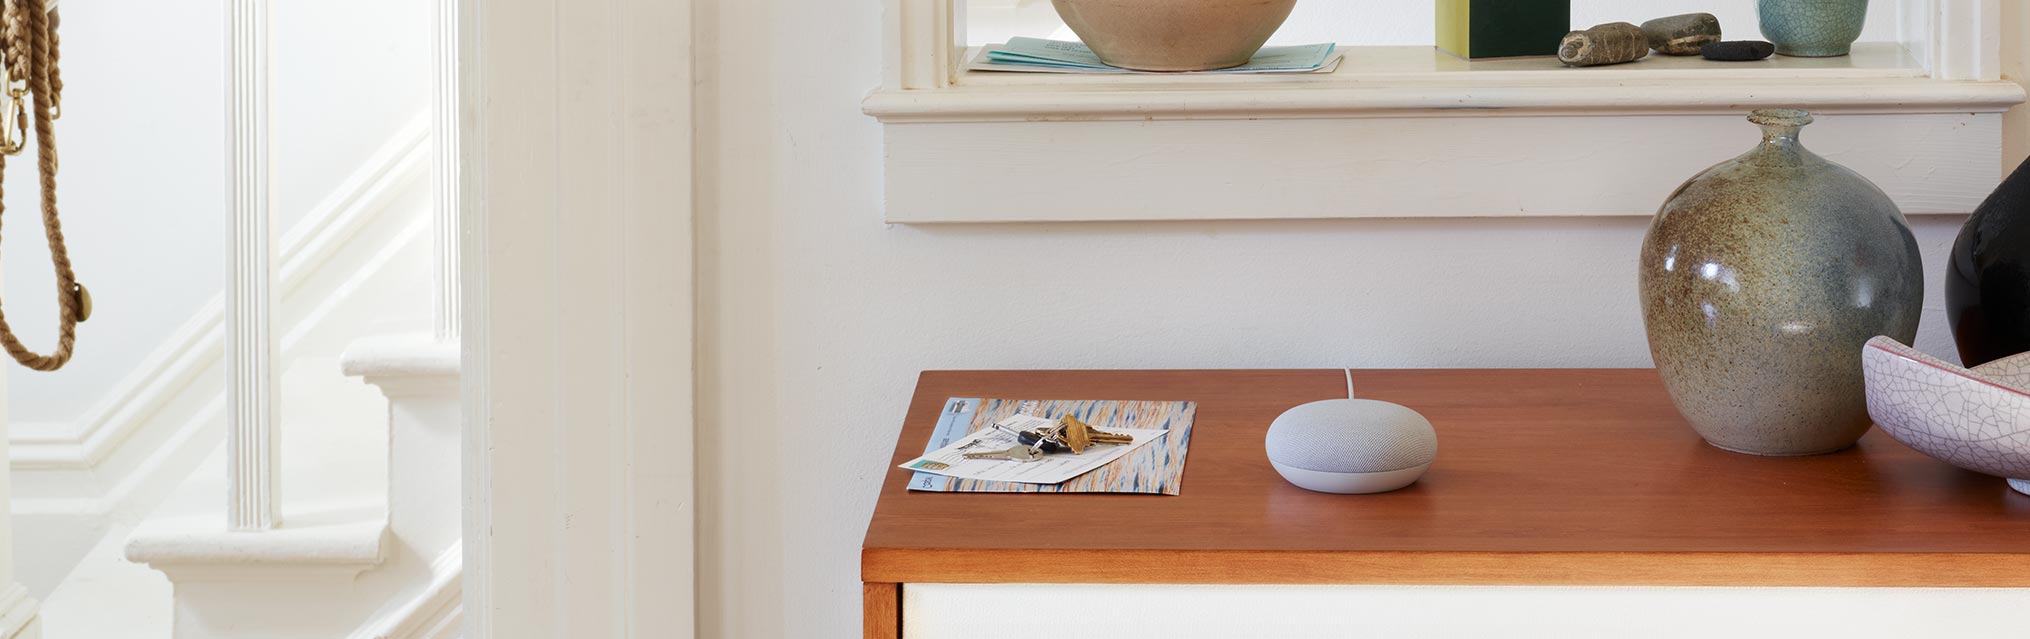 Customer pricing on Google Nest smart home products
